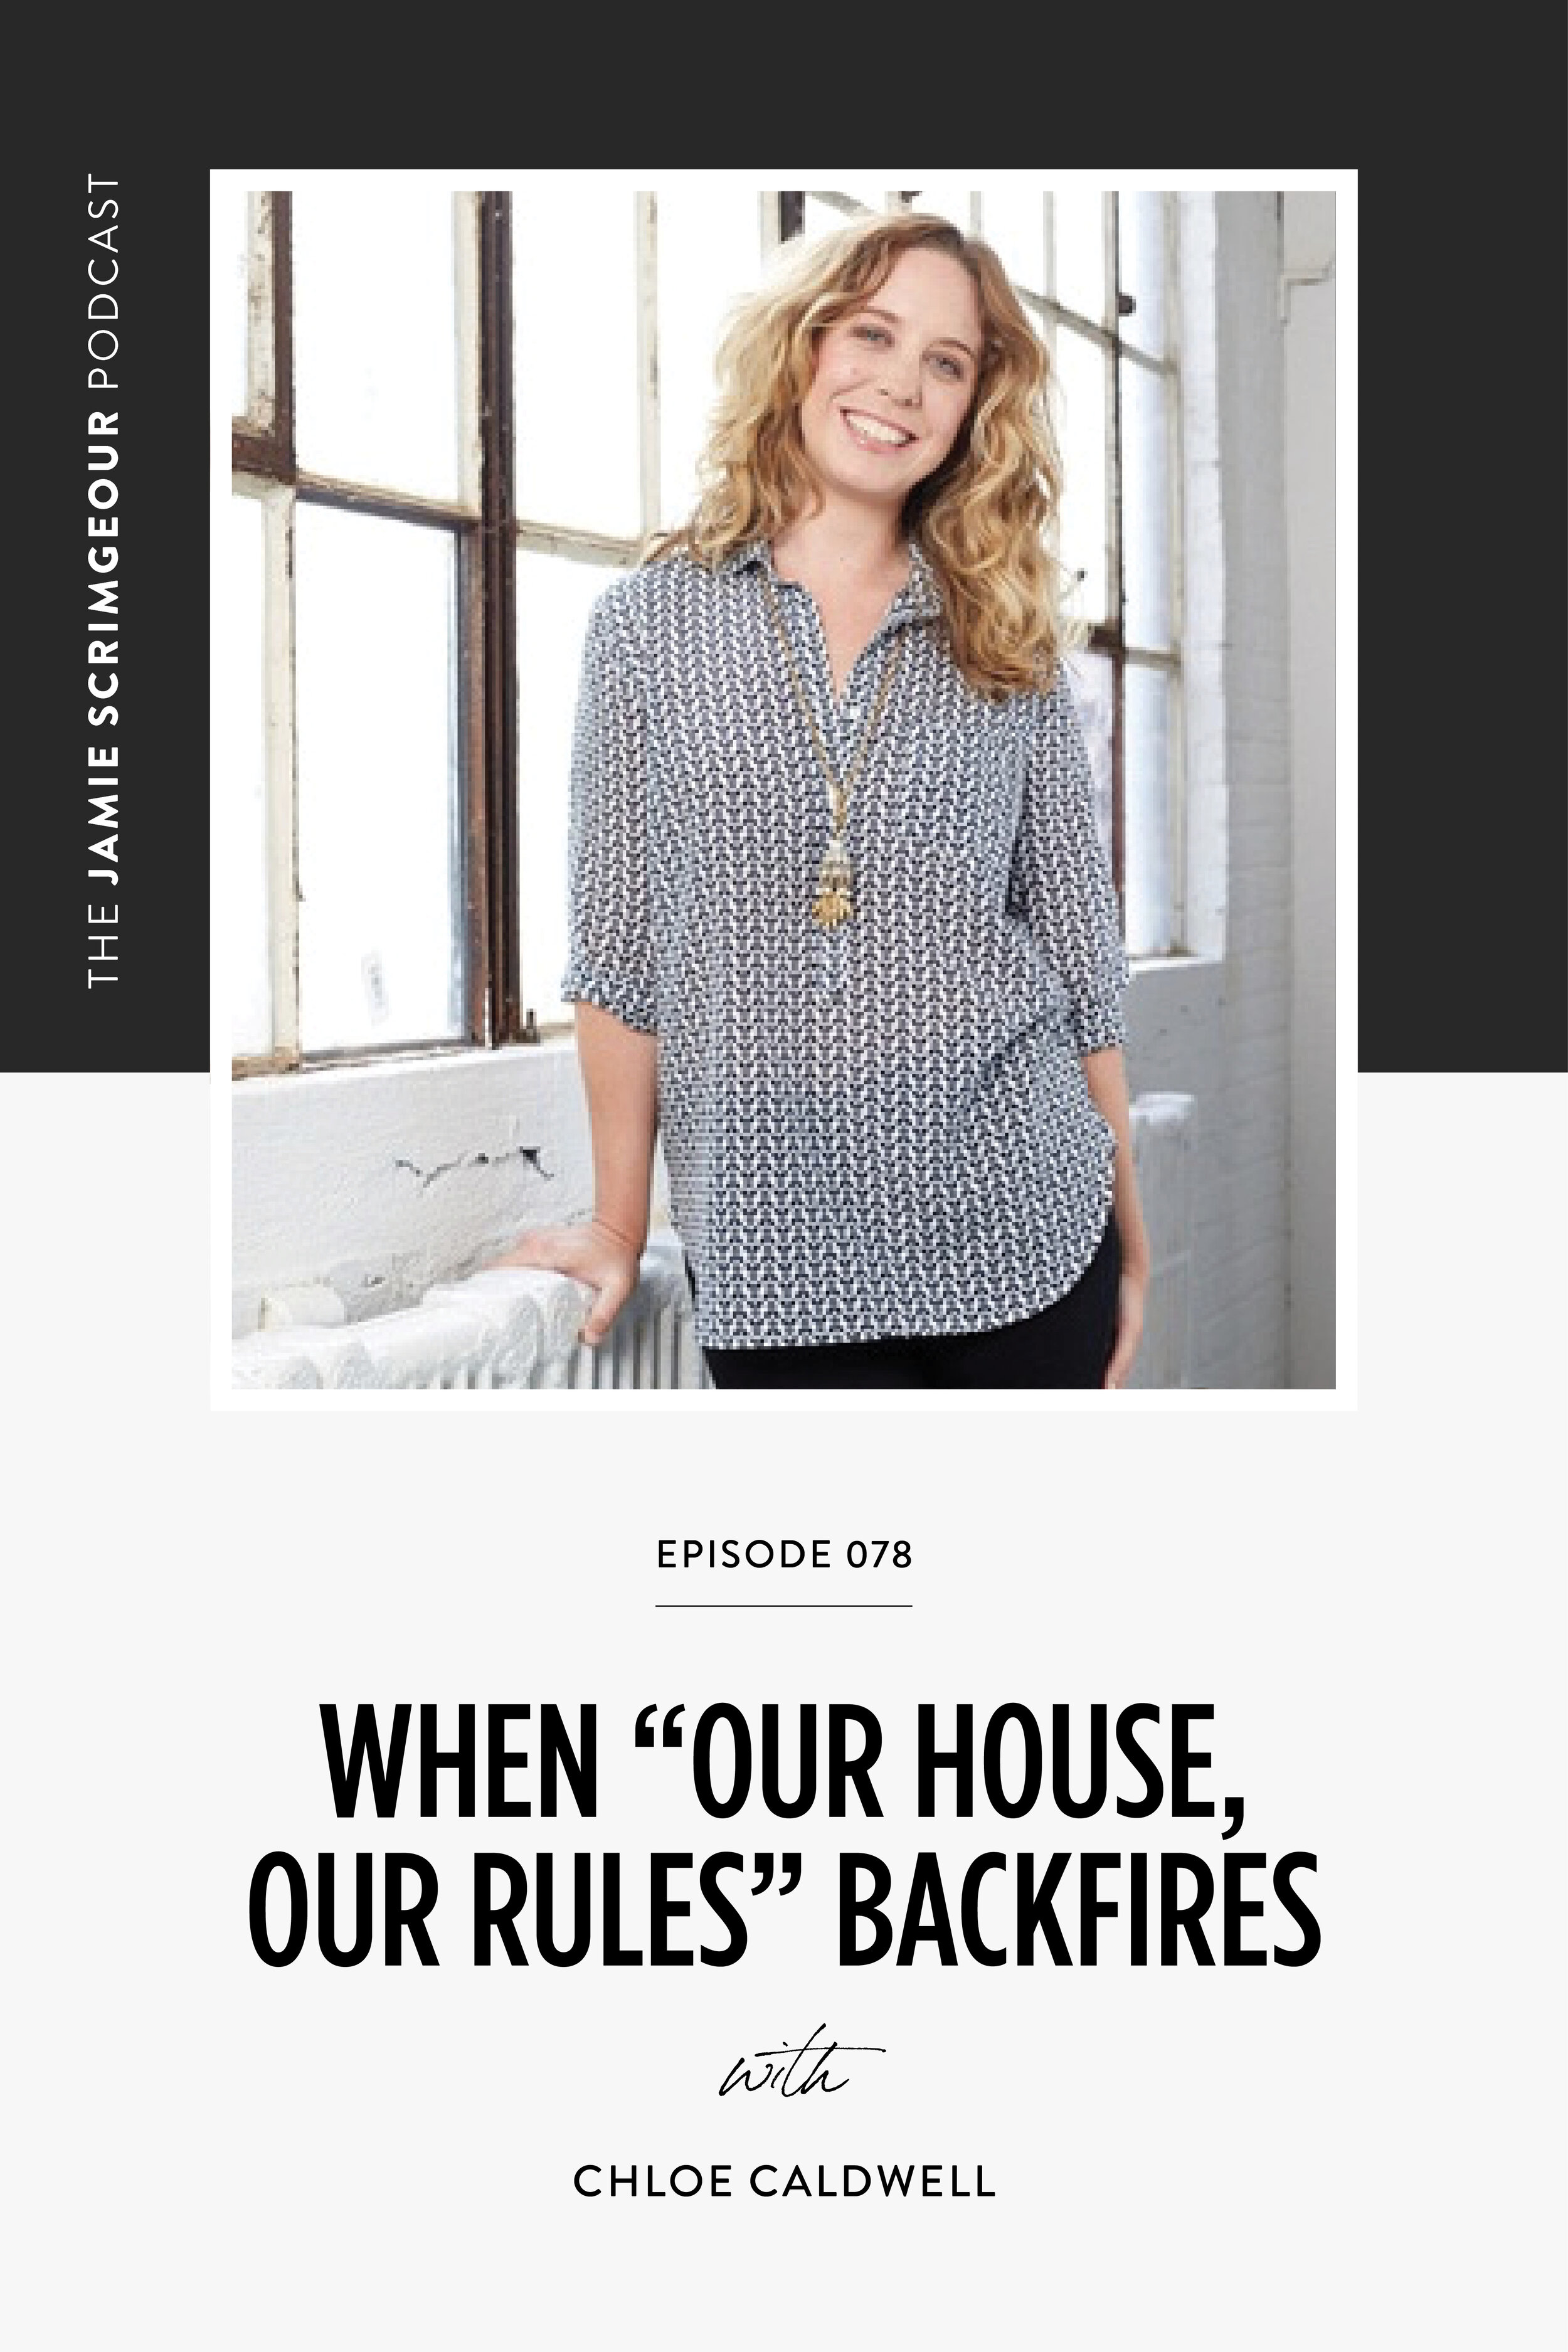 The Jamie Scrimgeour Podcast Episode 078 - When "Our House, Our Rules" Backfires with Chloe Caldwell